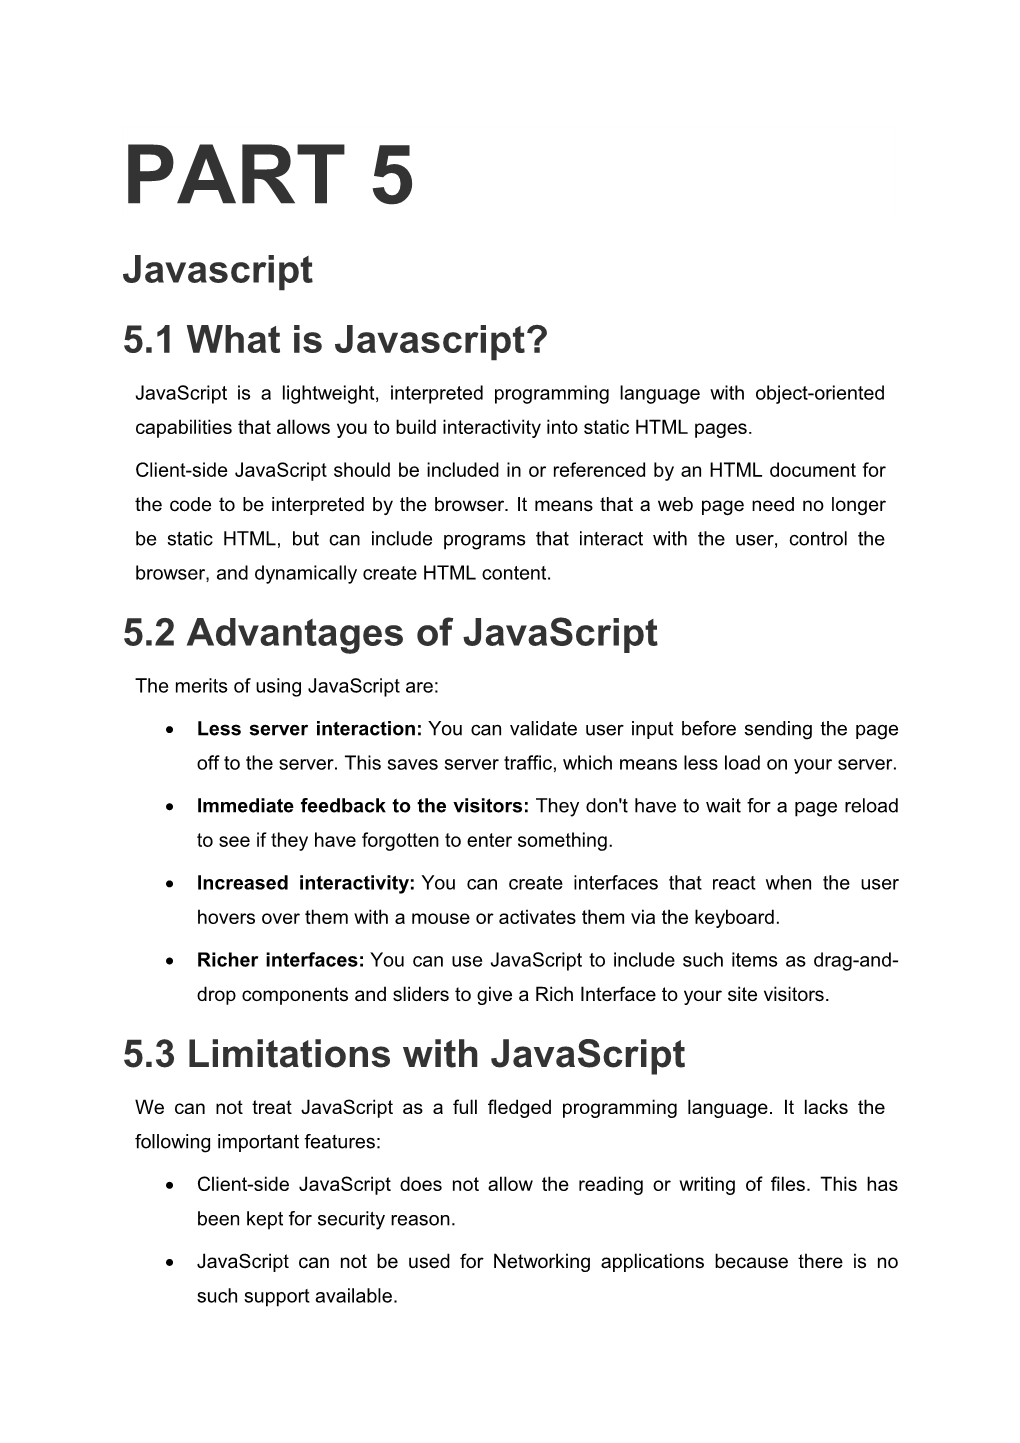 5.1 What Is Javascript?